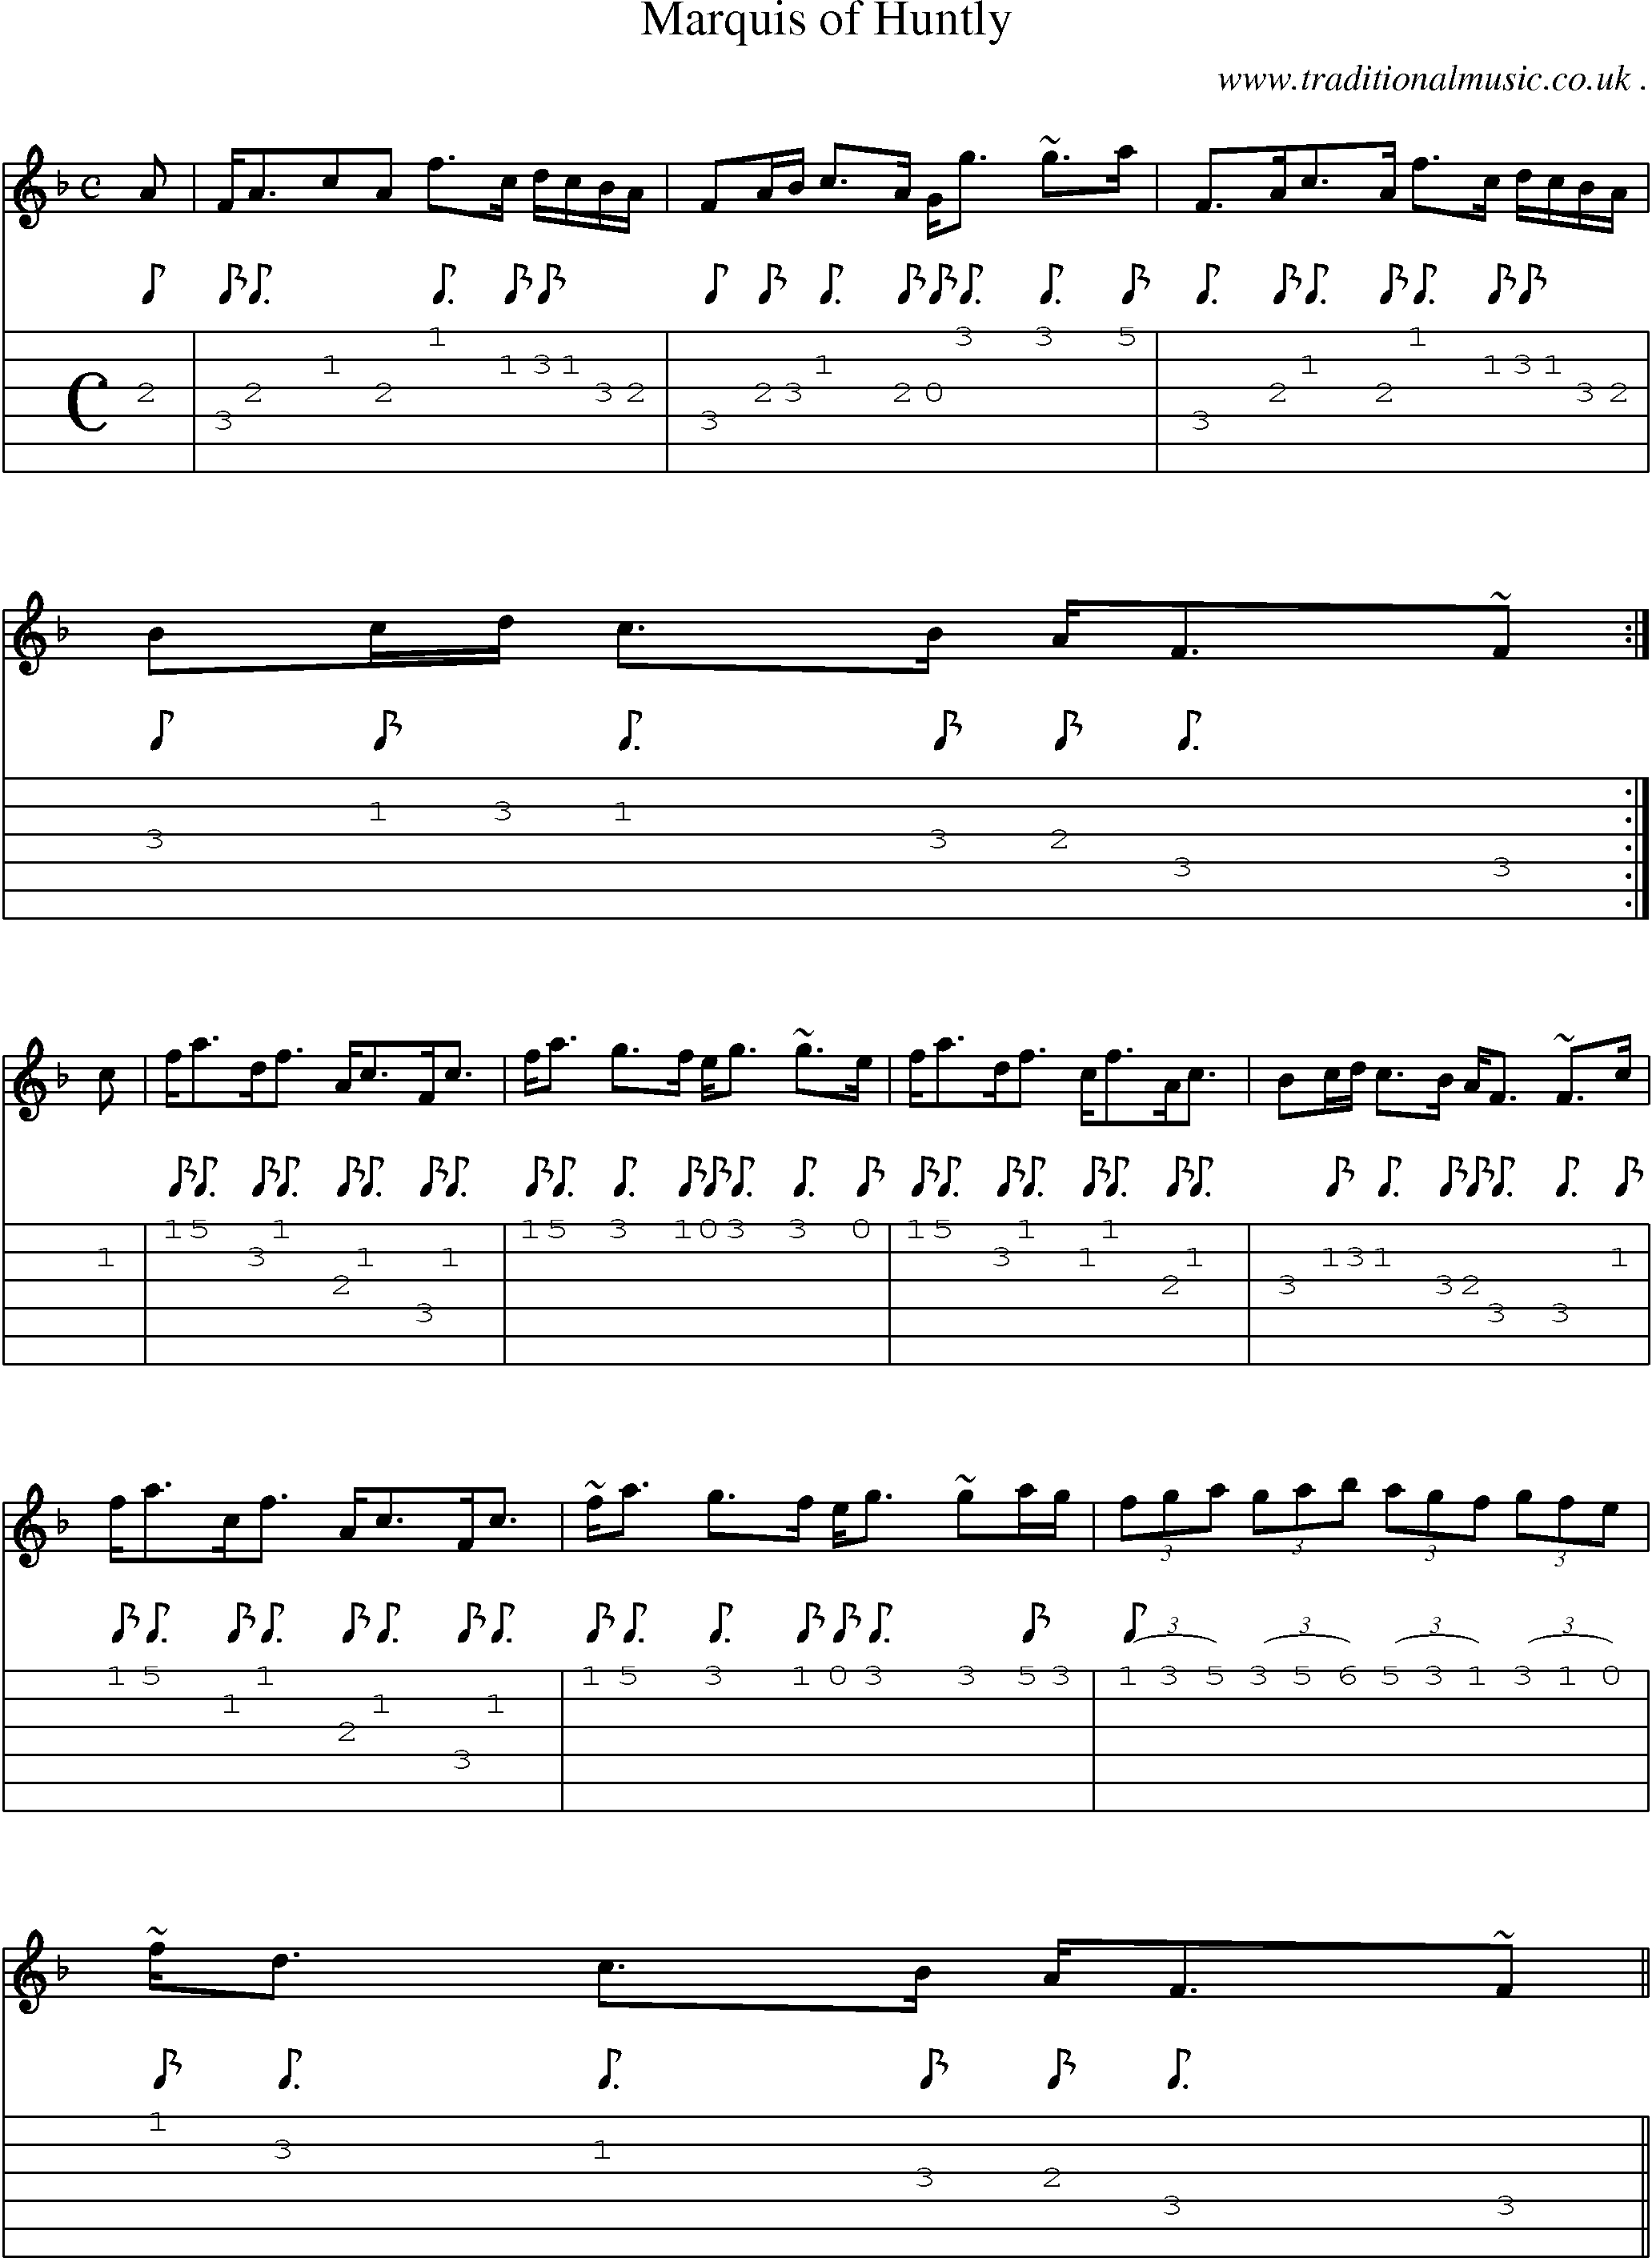 Sheet-music  score, Chords and Guitar Tabs for Marquis Of Huntly